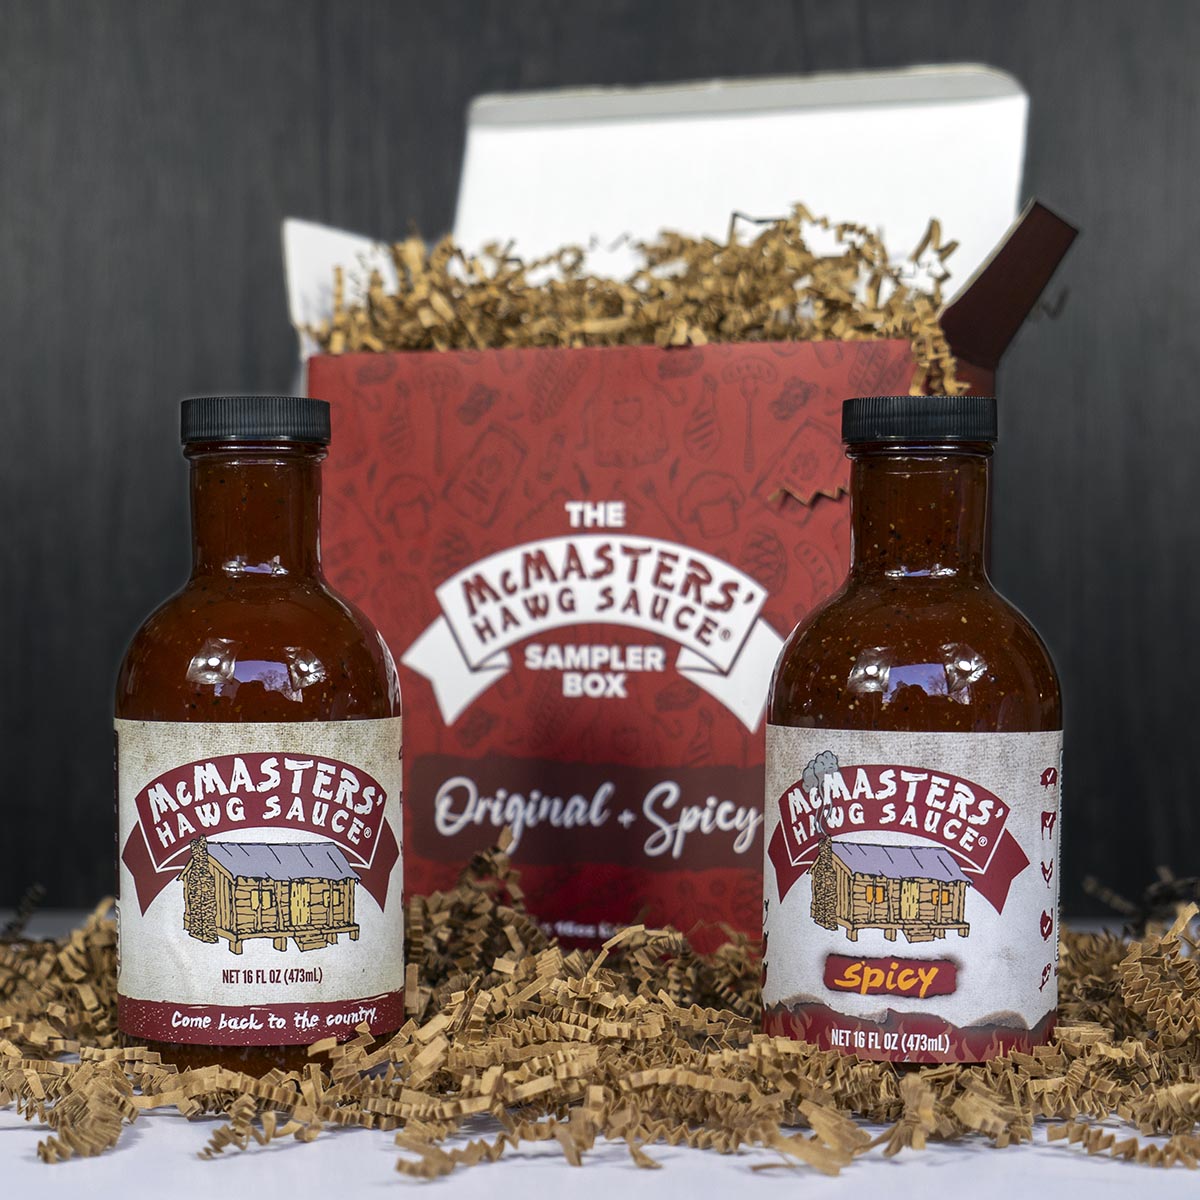 A bottle of McMasters' Hawg Sauce Original and a bottle of Spicy in front of a red gift box labeled The McMasters' Hawg Sauce Sampler Box